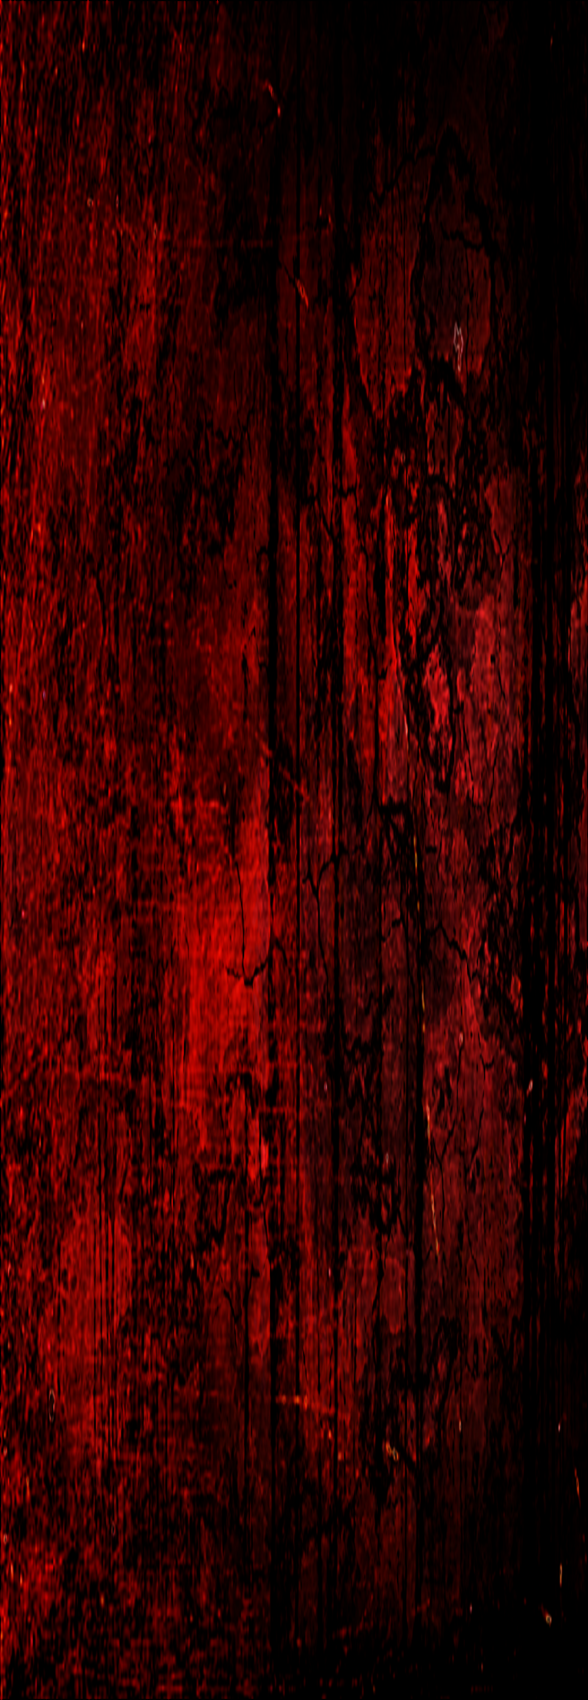 Special red tree bloody picture hd free download